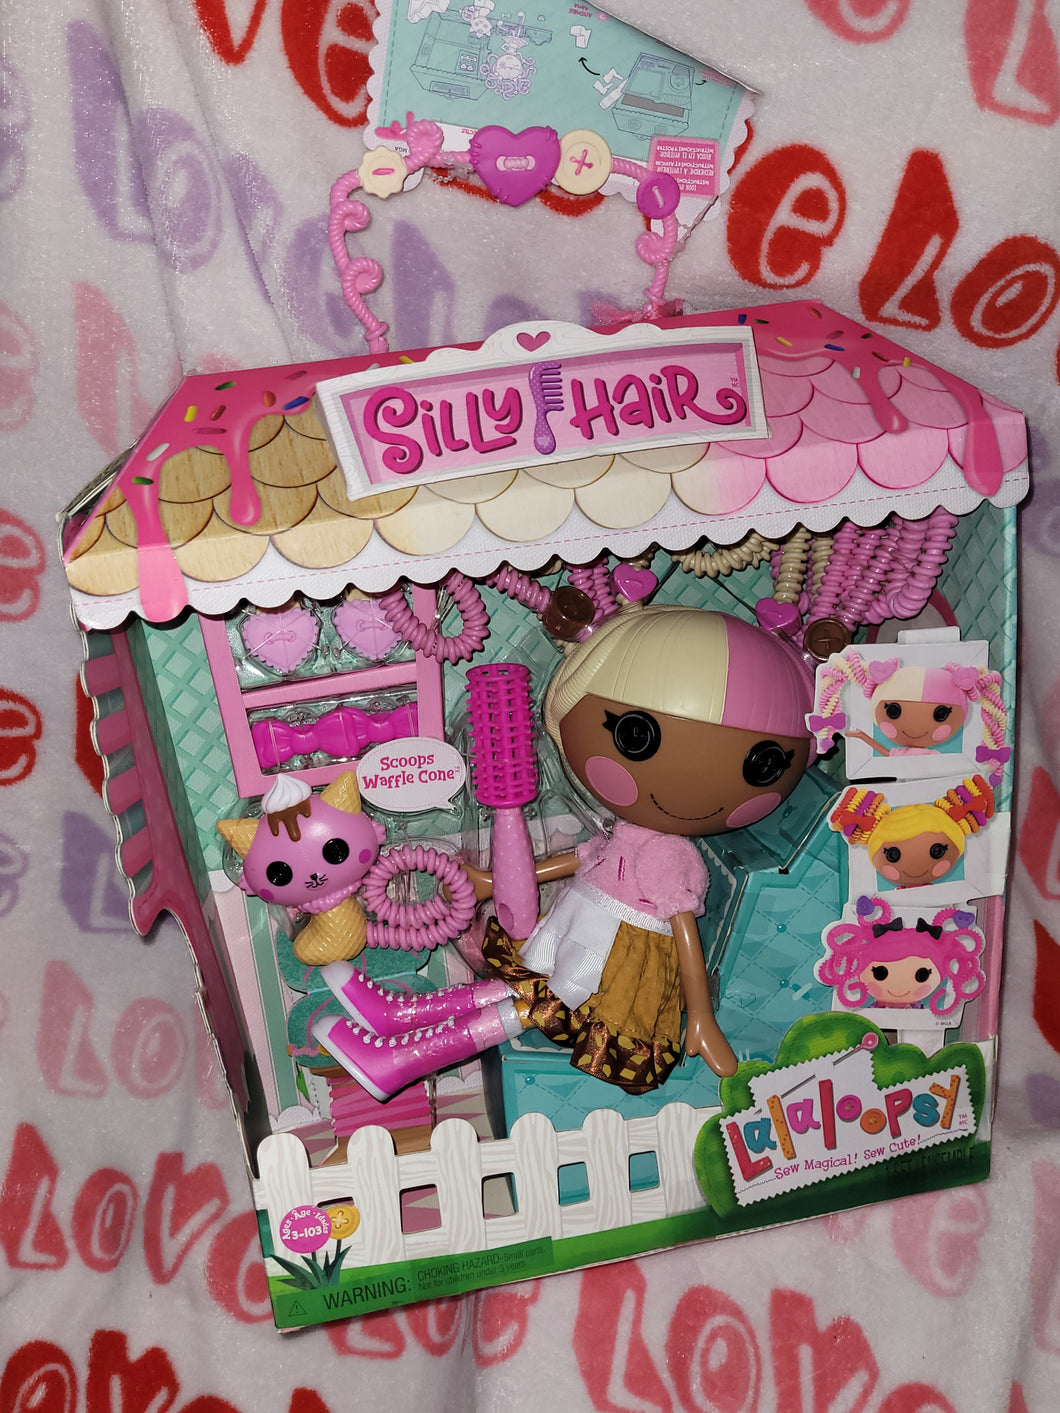 NEW Lalaloopsy Silly Hair full size doll & pet